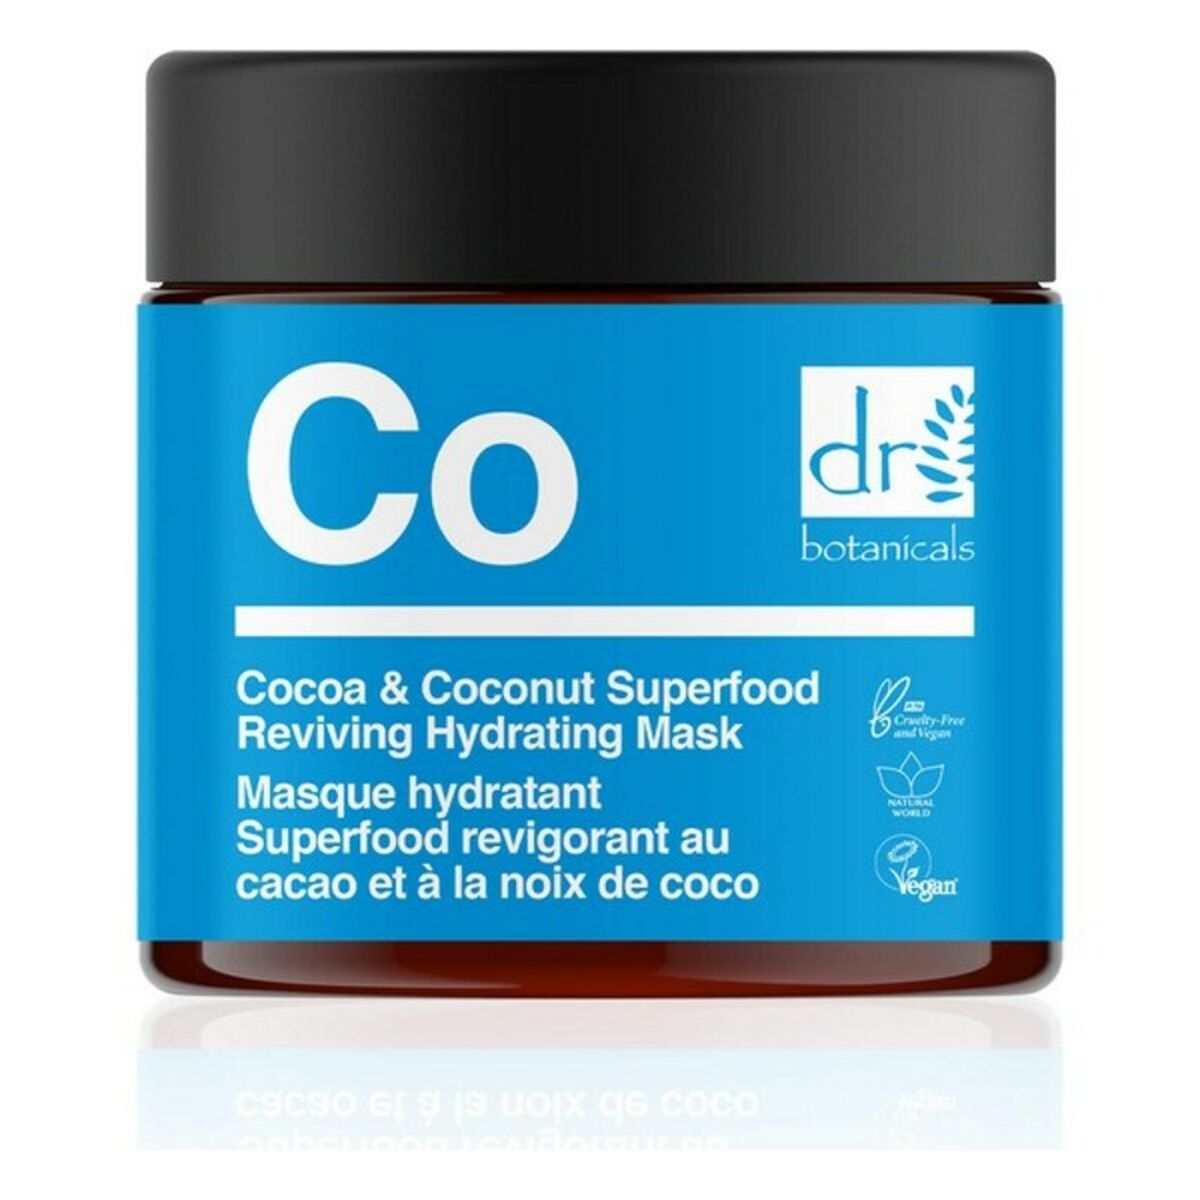 Facial Mask Cocoa & Coconut Superfood Botanicals (50 ml)